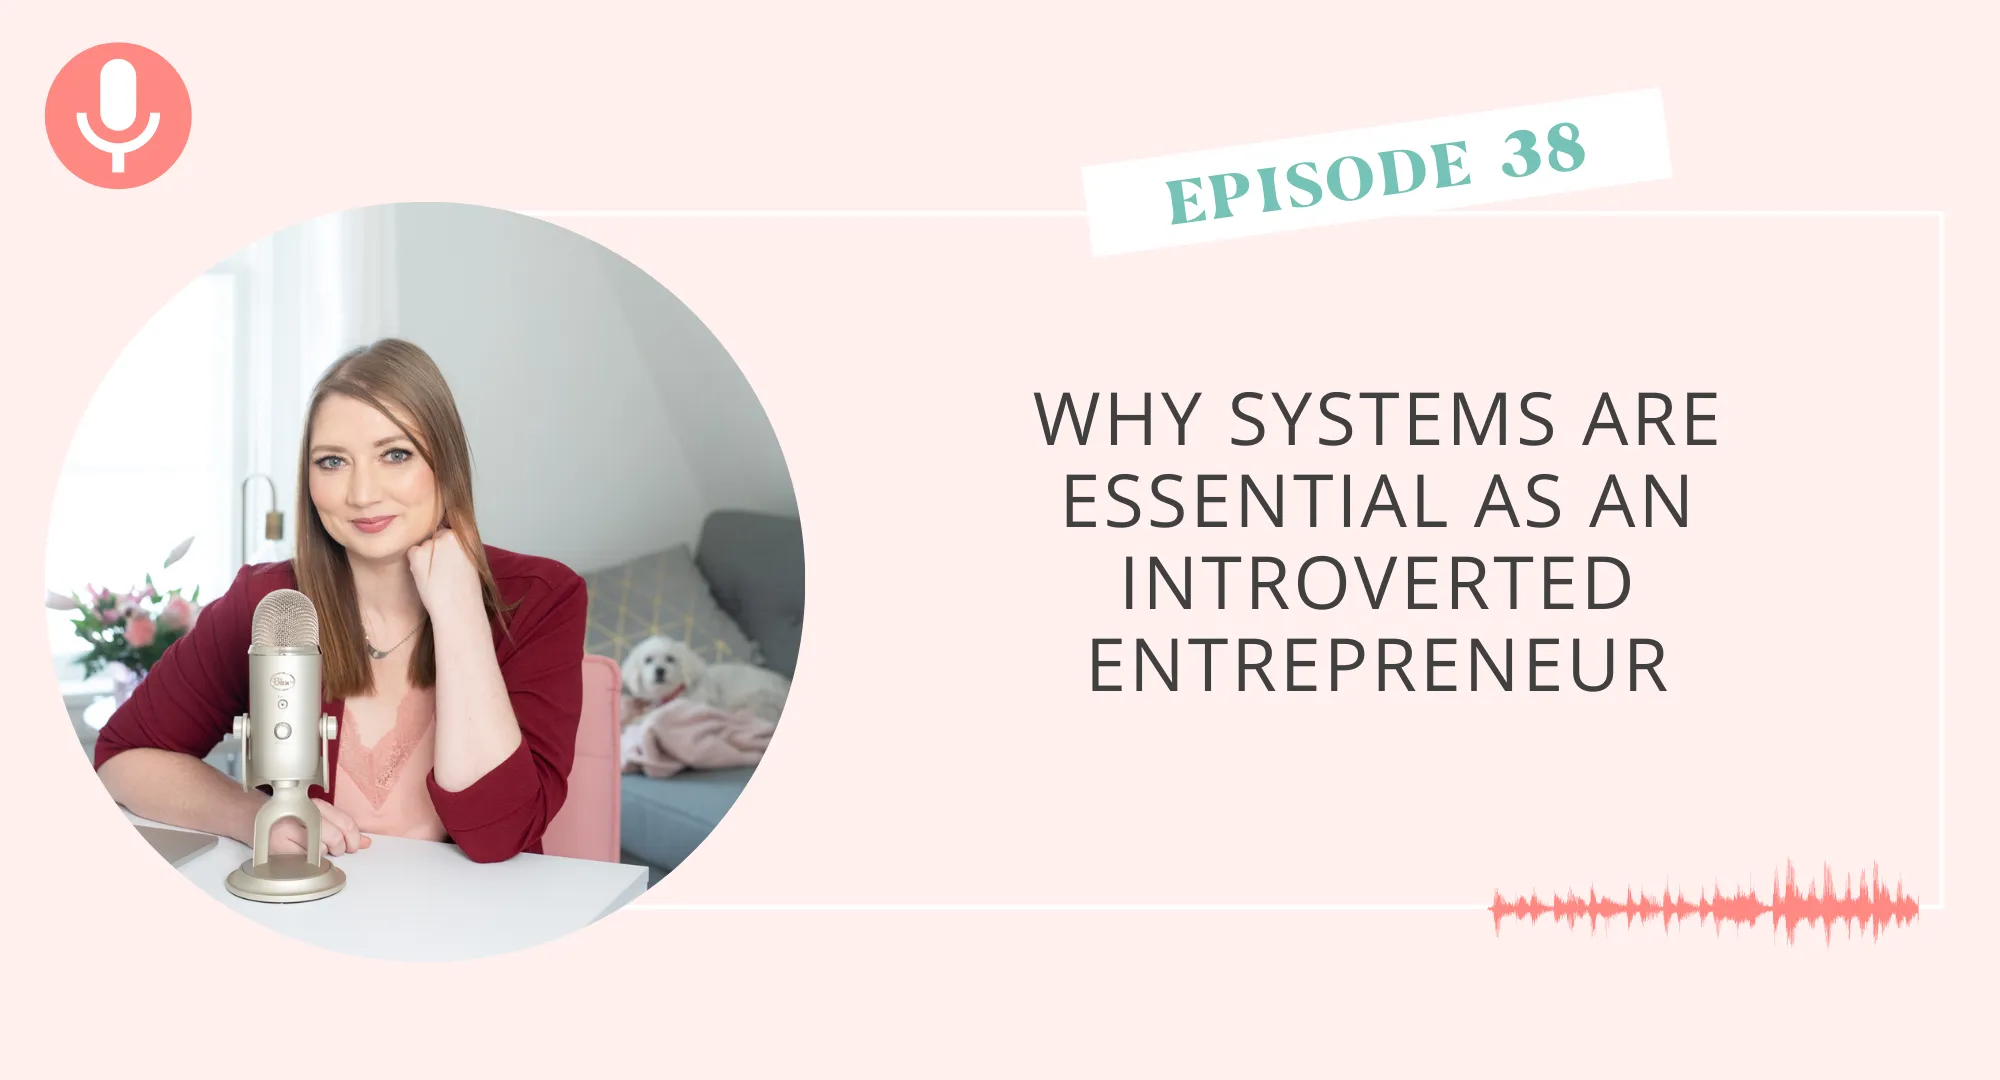 Why Systems Are Essential as an Introverted Entrepreneur